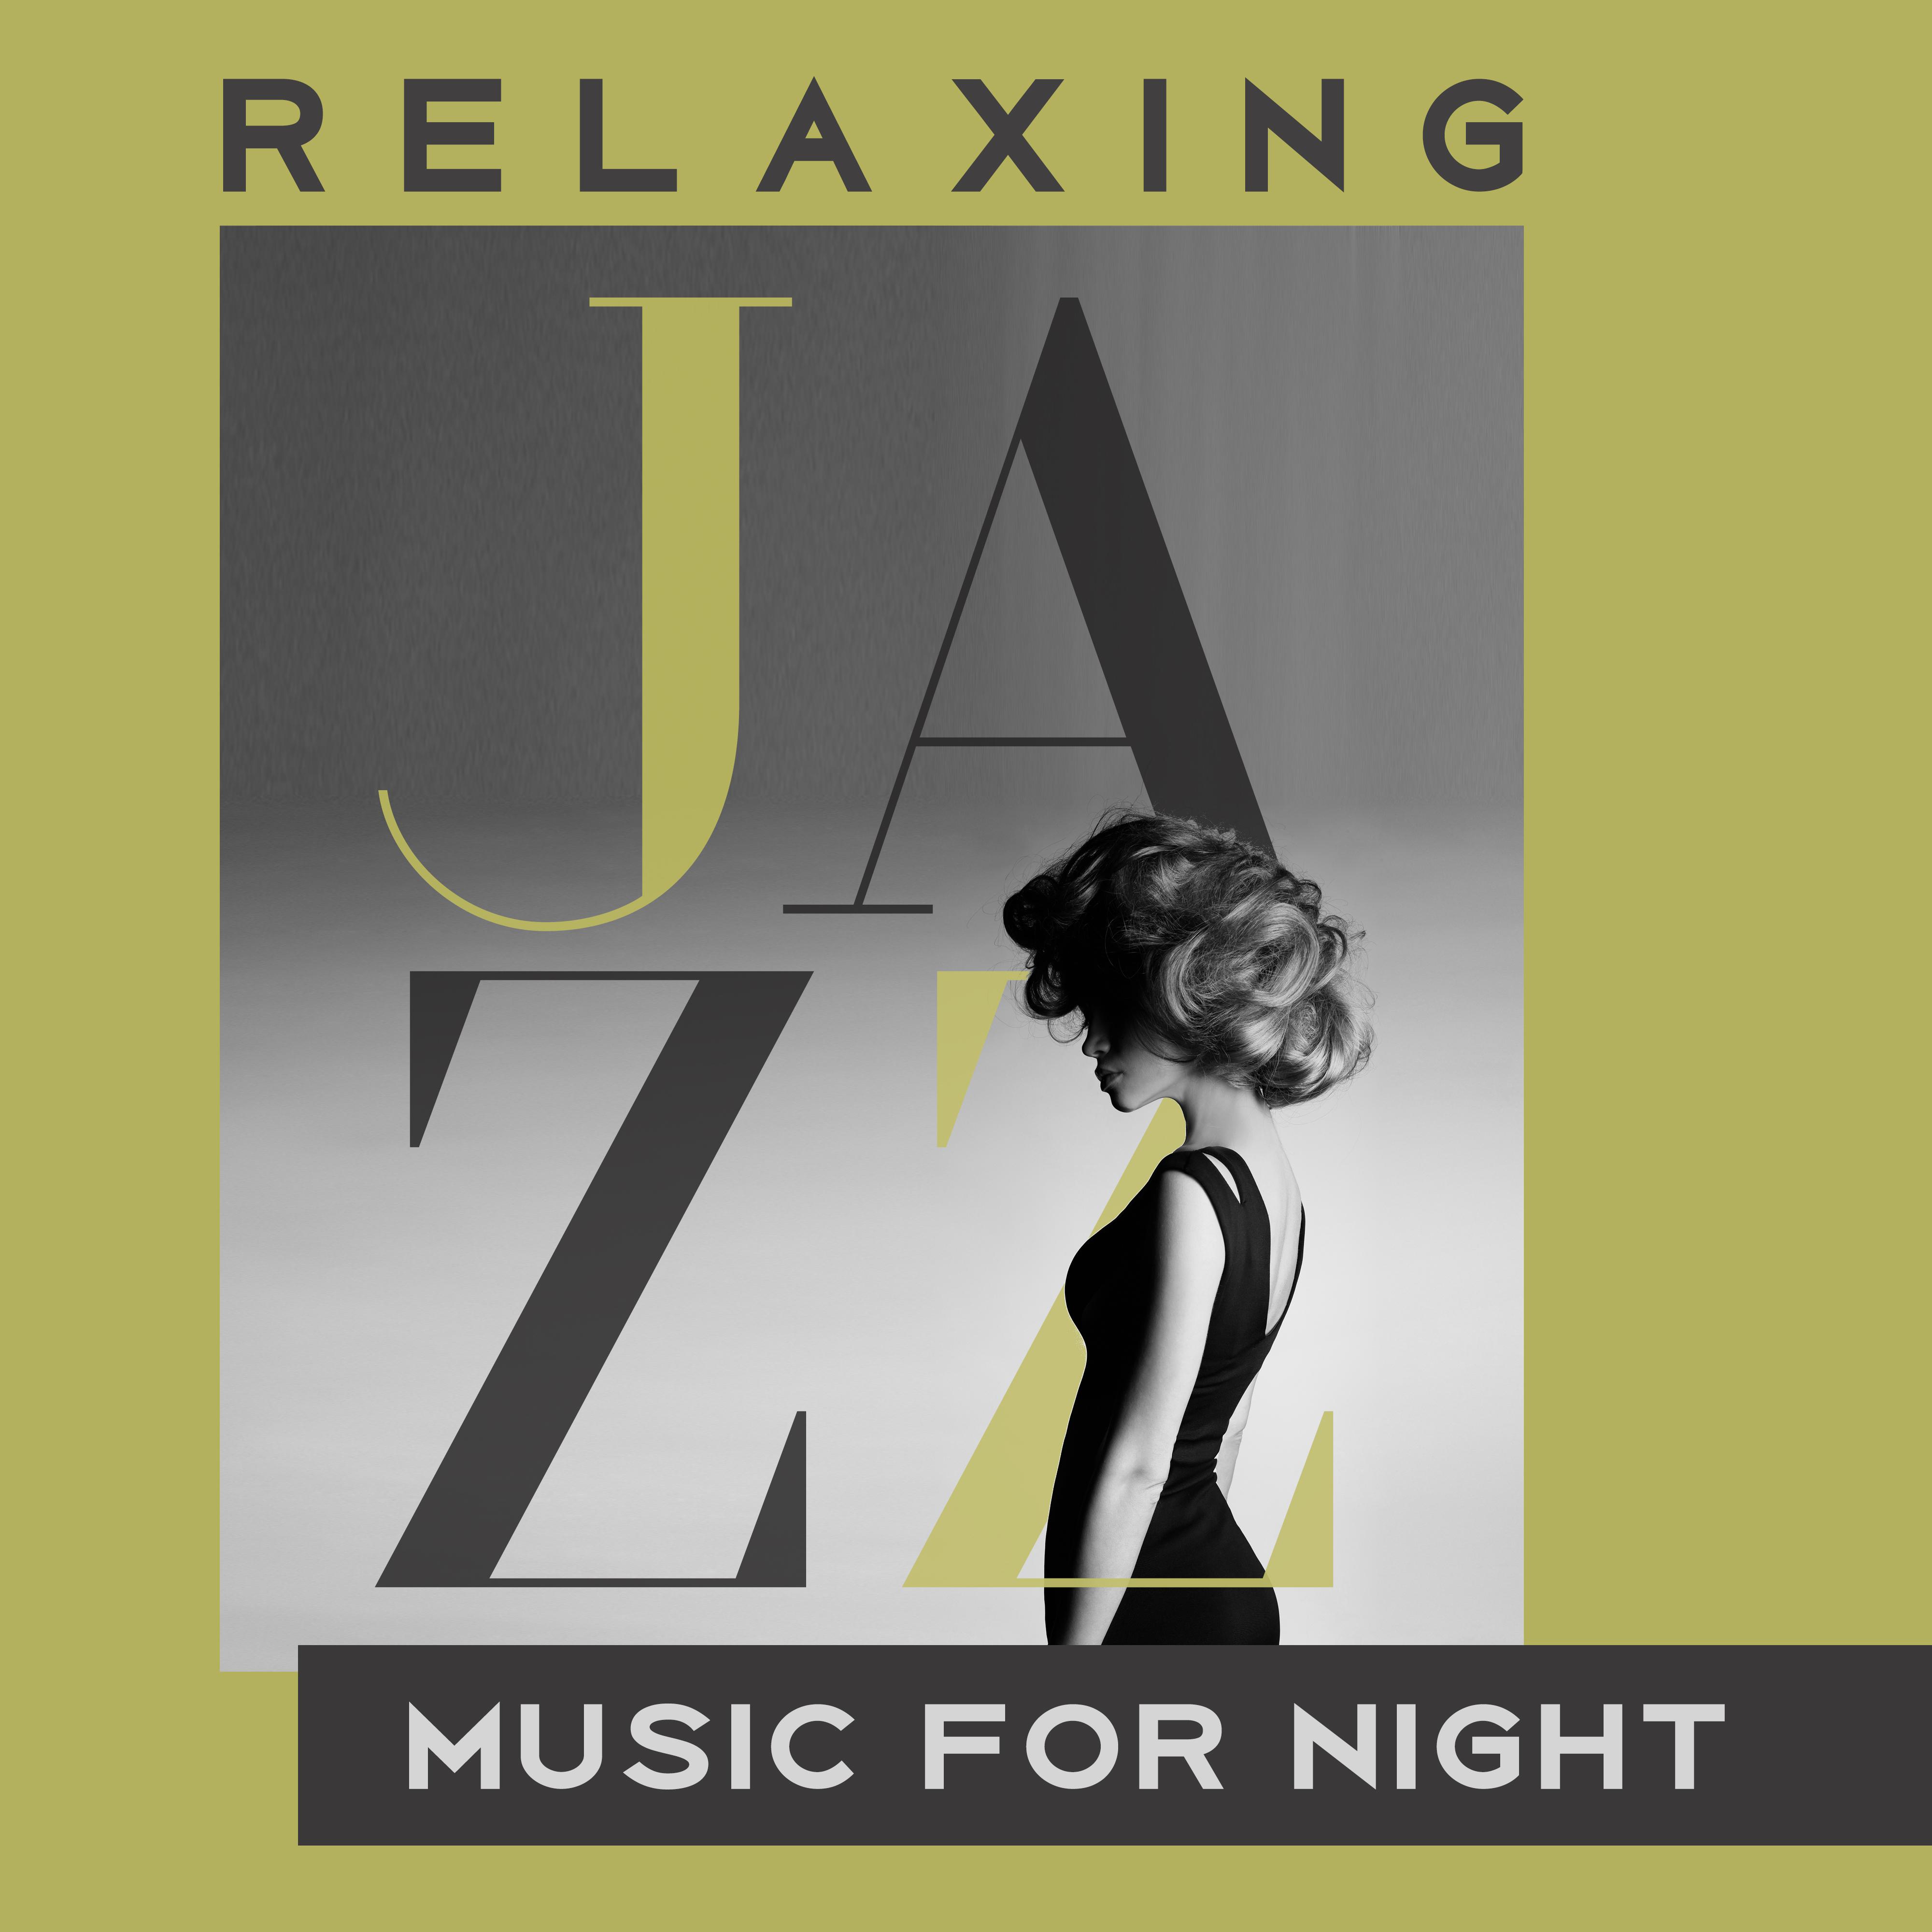 Relaxing Jazz Music for Night